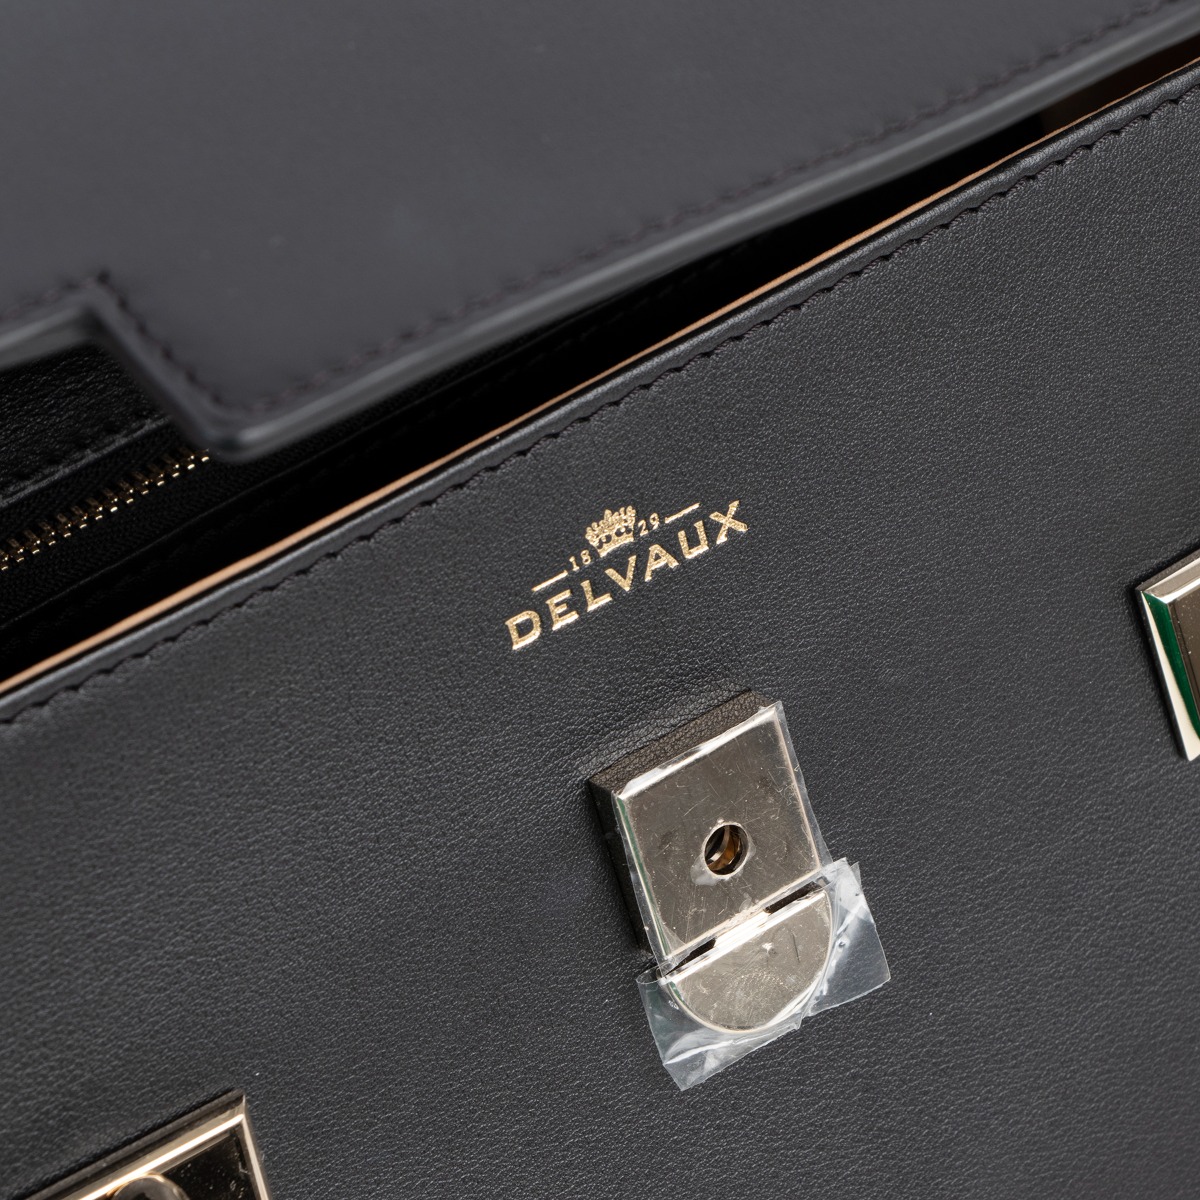 Delvaux Tempete Black Calf - MyBagFast